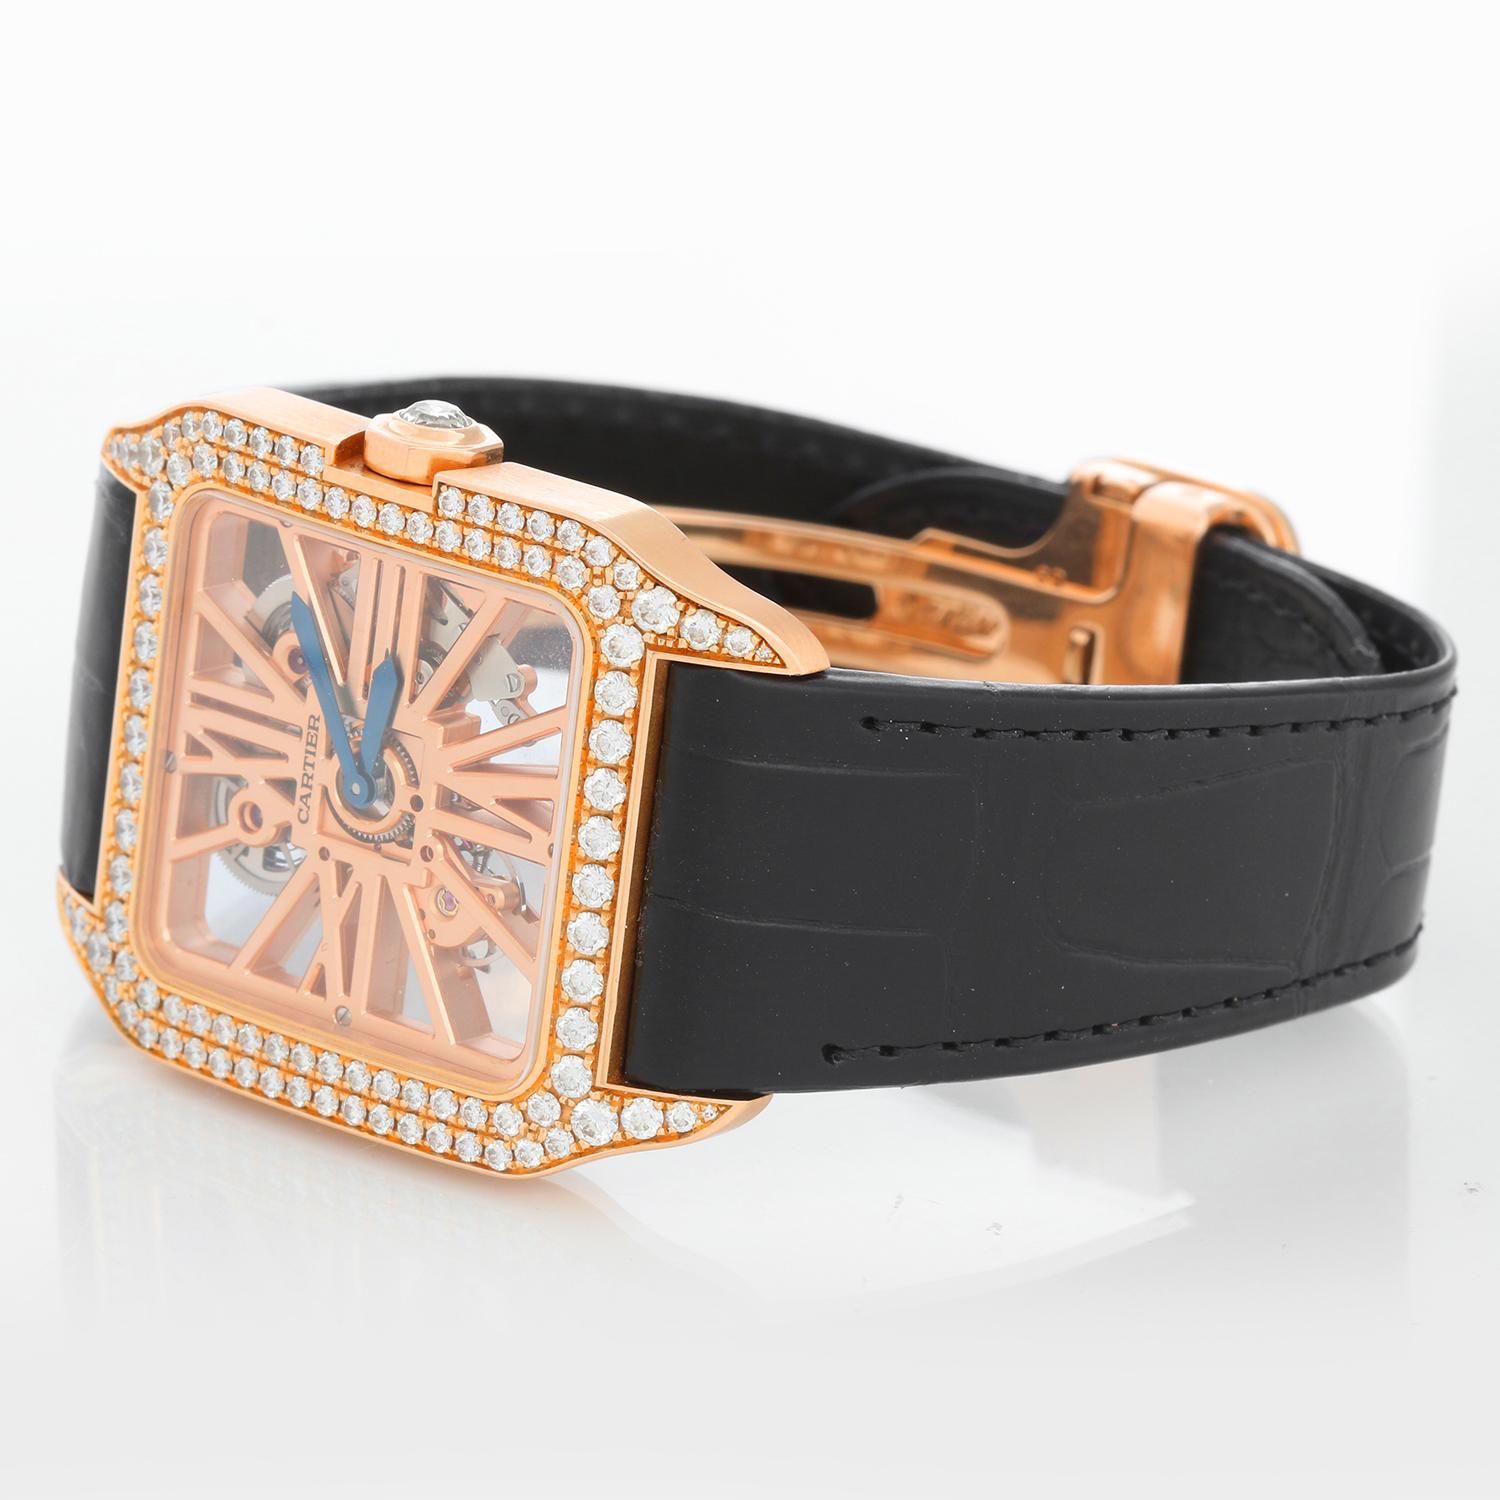 Cartier Santos Dumont Skeleton Rose Gold Diamond Watch HPI00587  - Manual. 18K Rose Gold with Diamond bezel and diamond crown( 38 mm x 47 mm ). Skeleton complication of bridges in the form of Roman numerals. New Cartier black strap with rose gold